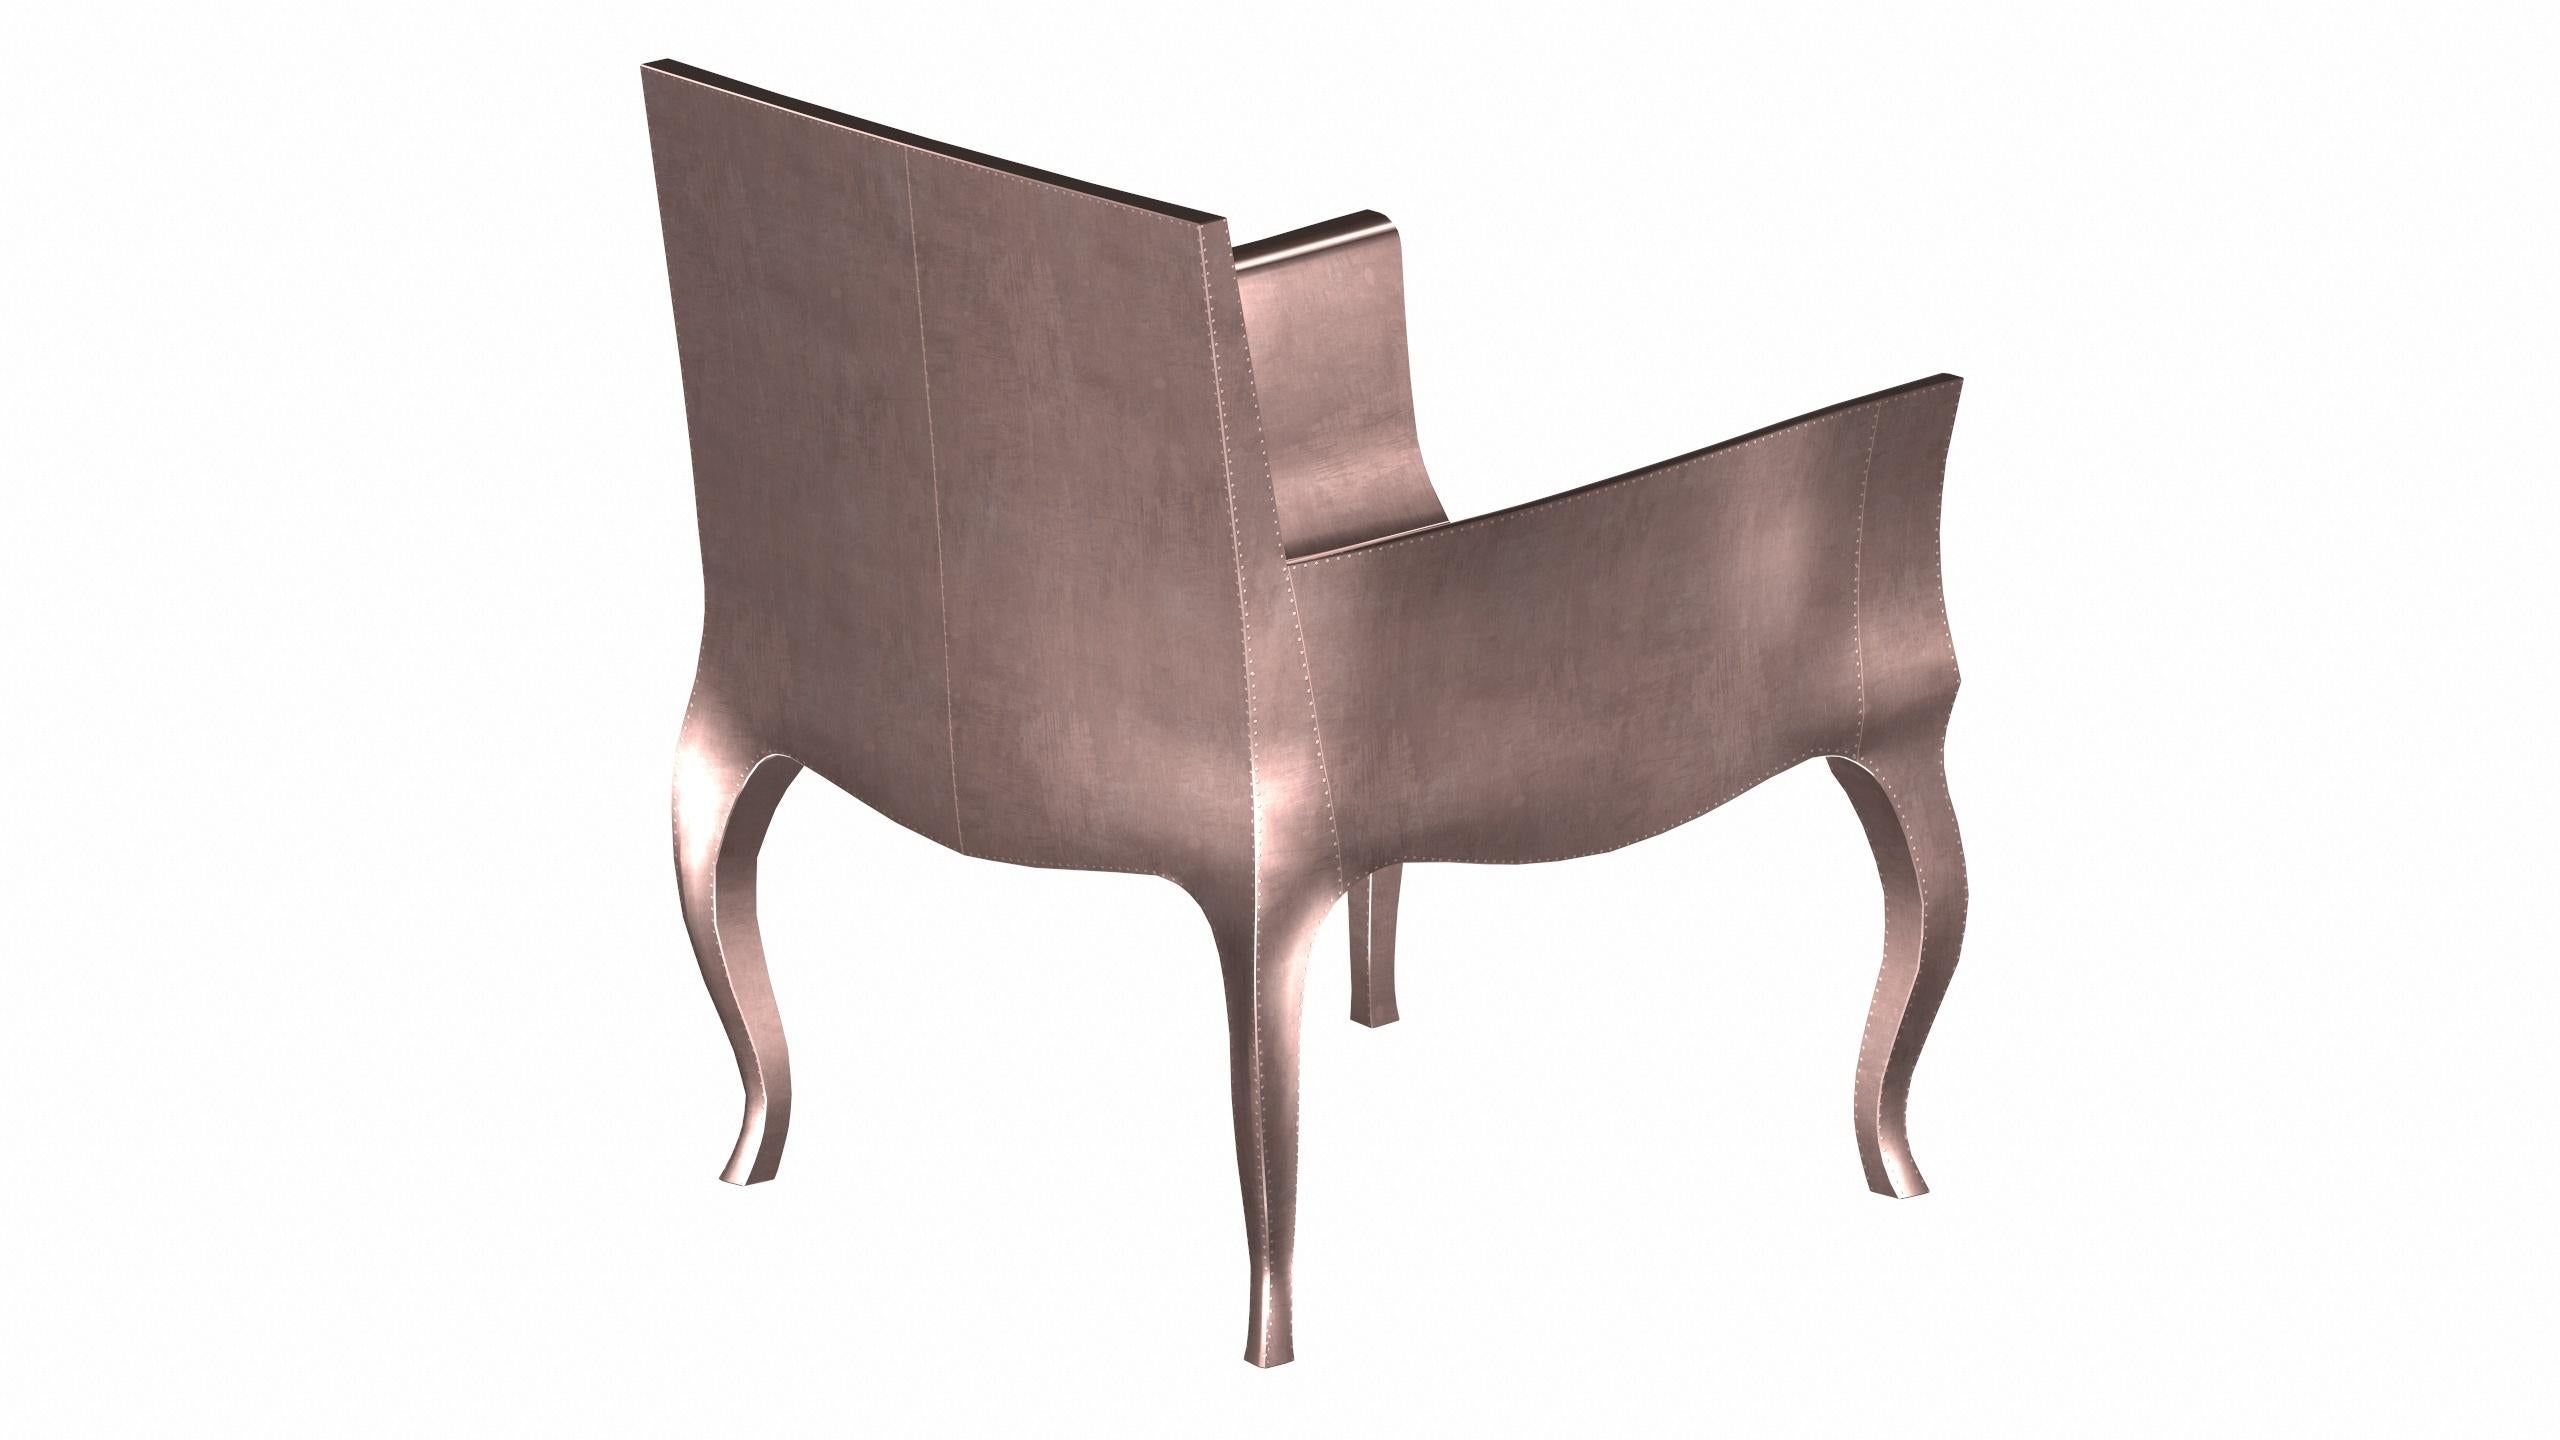 Indian Art Nouveau Dining Chairs in Smooth Copper by Paul Mathieu for S. Odegard For Sale